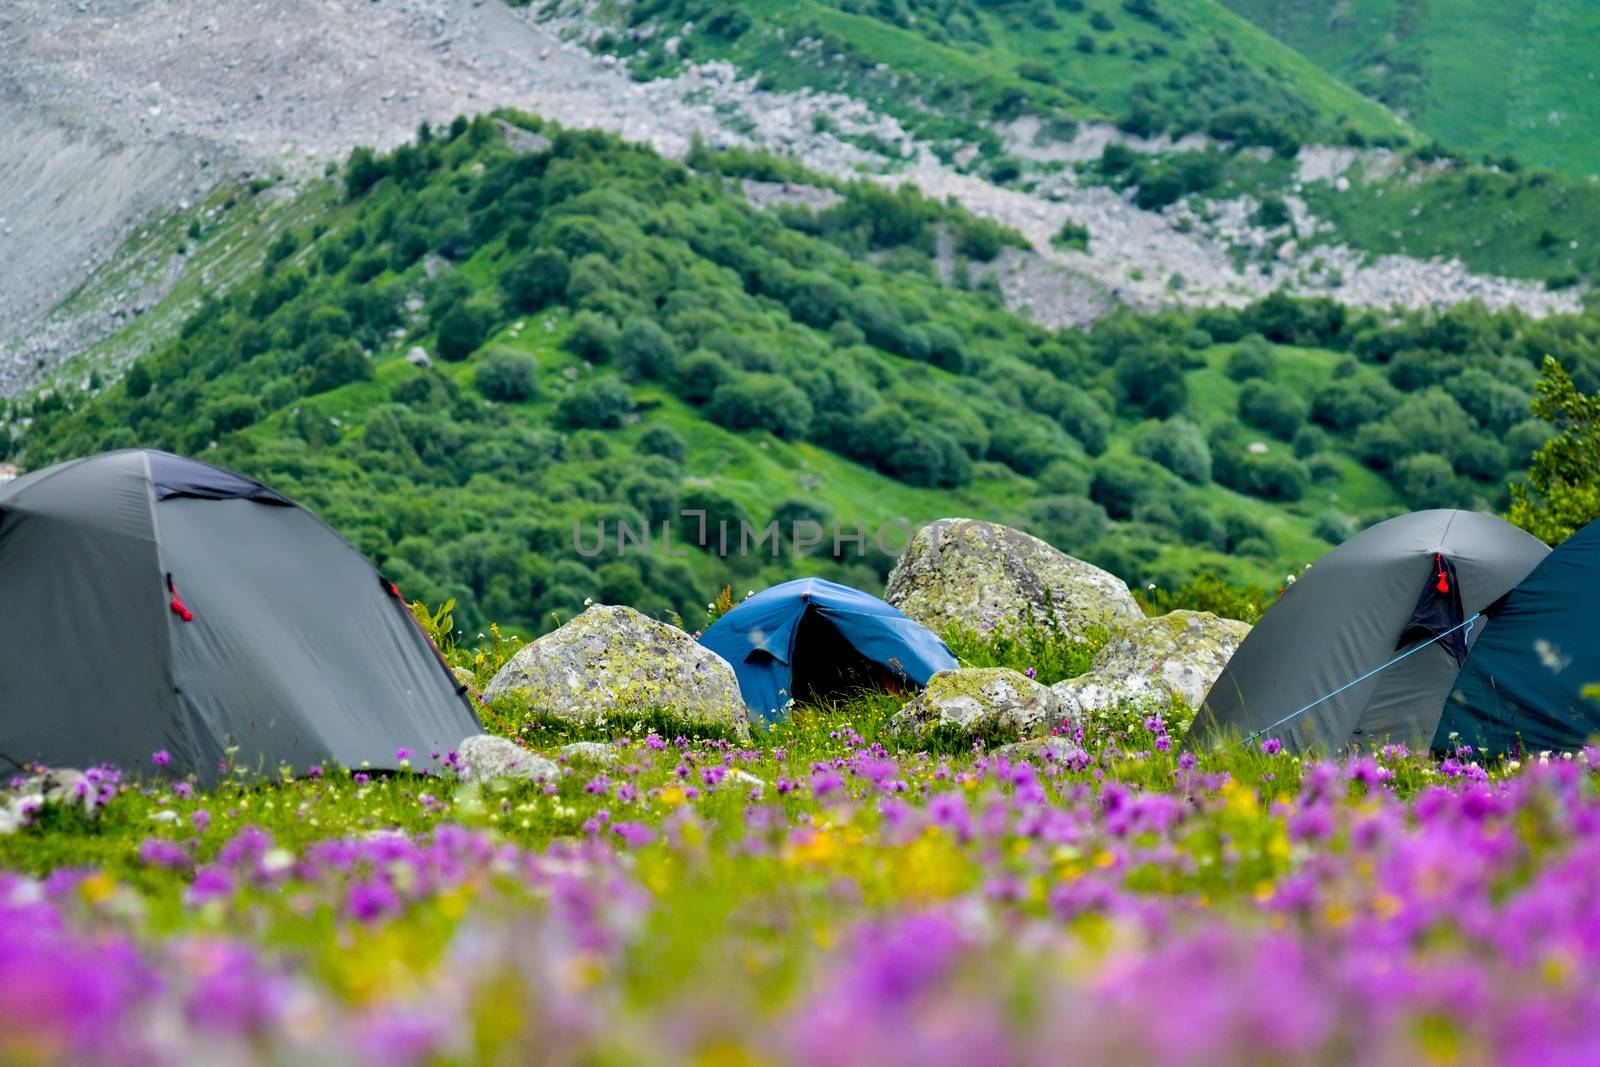 Tent camp on a lawn between large stones and purple yellow field flowers. Summer in Georgia.